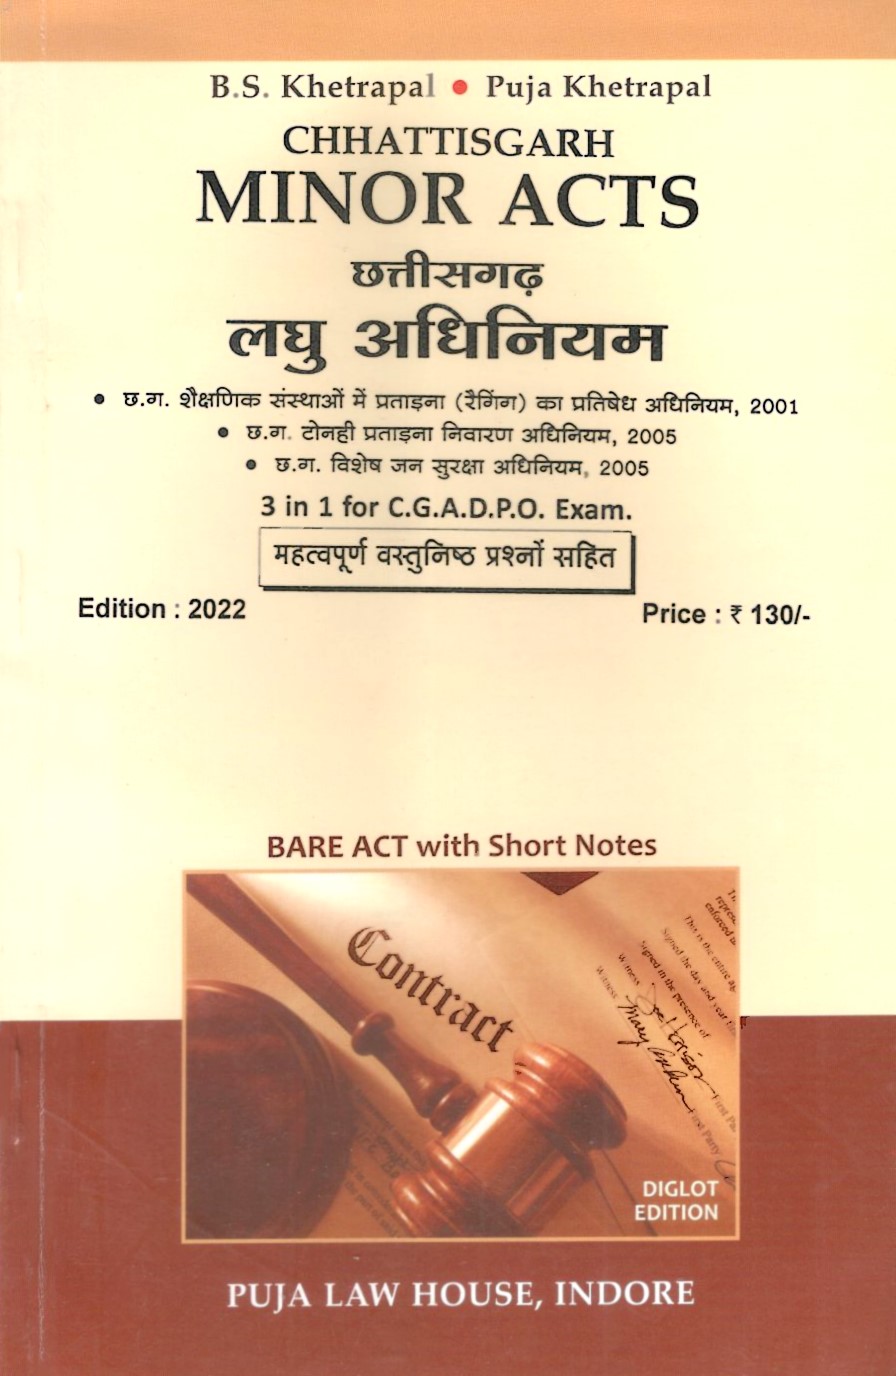  Buy C.G. Minor Acts / छ.ग. माइनर एक्ट्स - 3 in 1 for C.G.A.D.P.O. Exam.